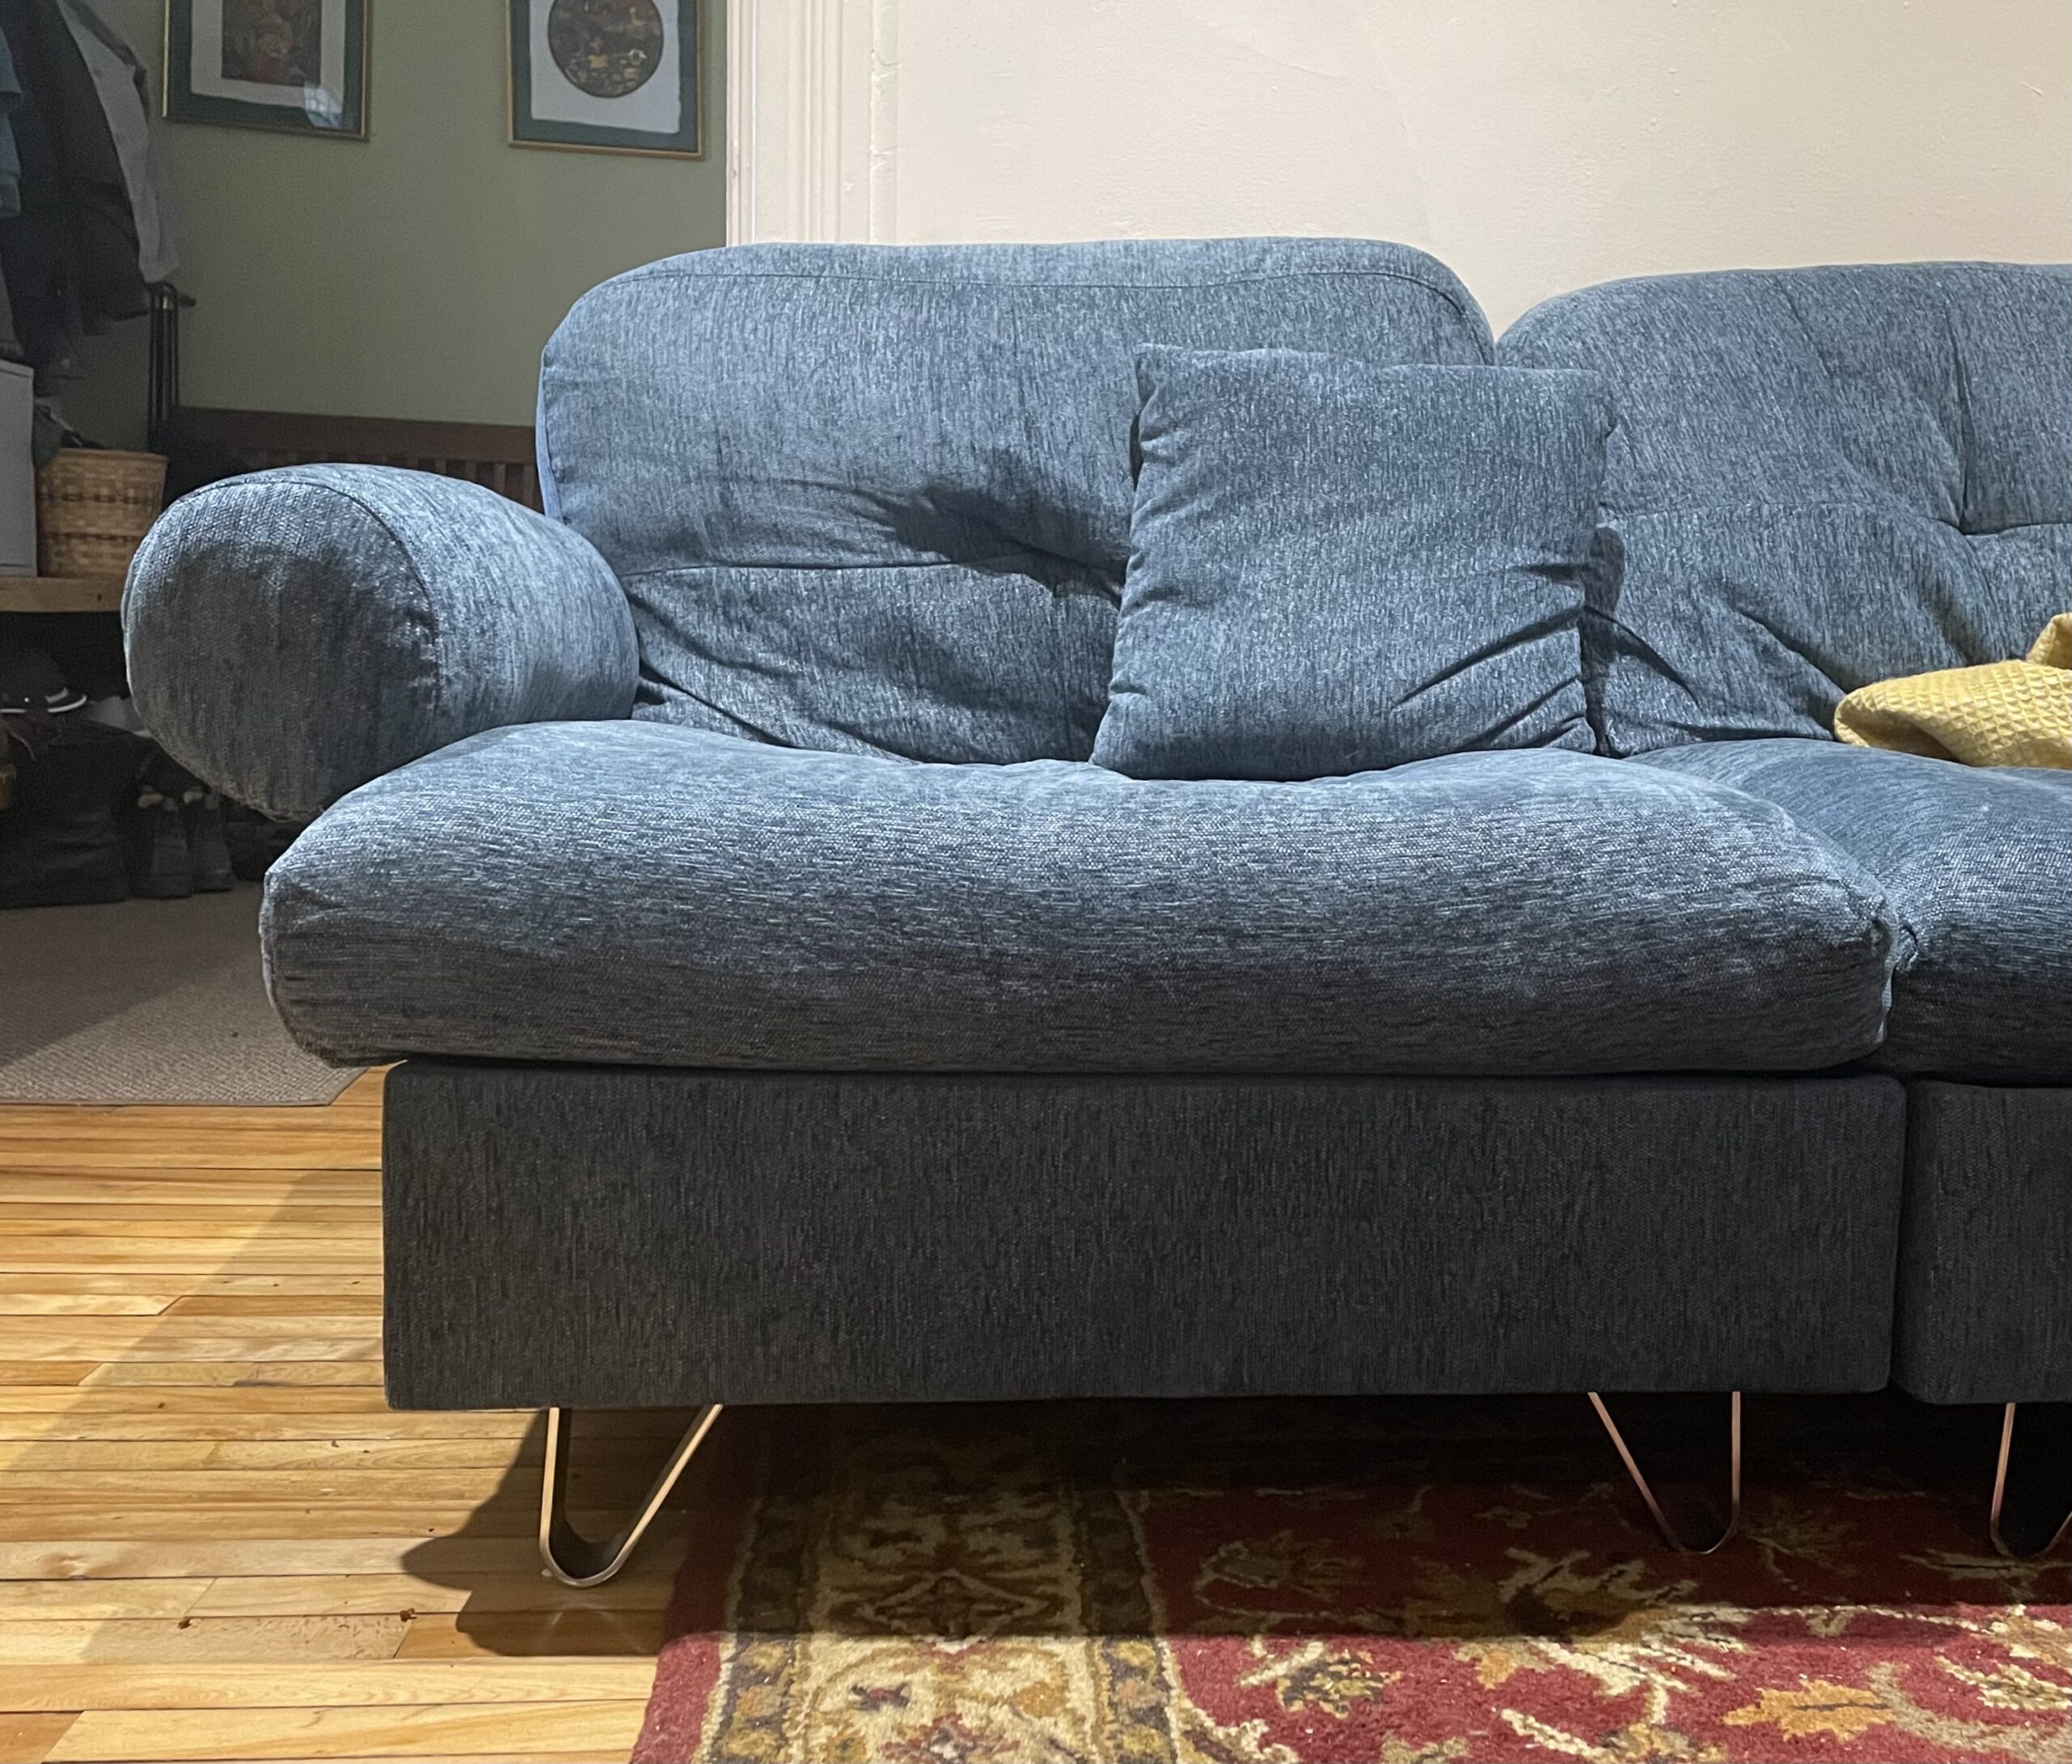 The Transformer Couch: A Review